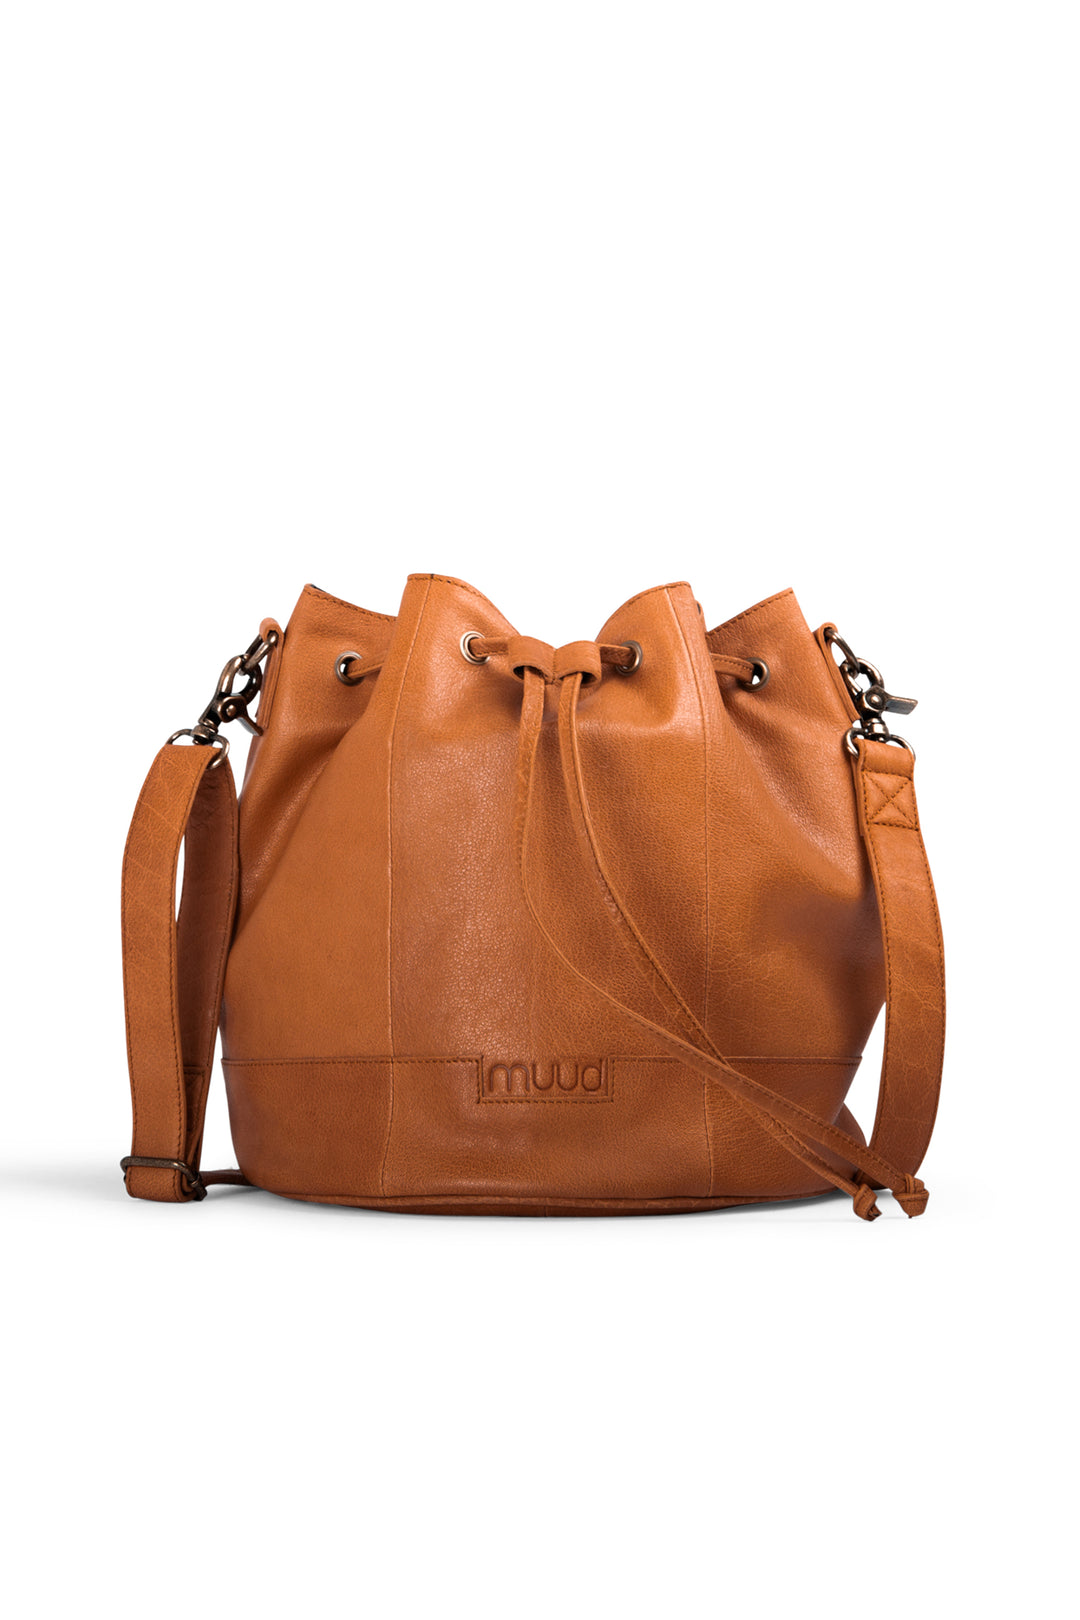 MUUD DONNA Project Bag